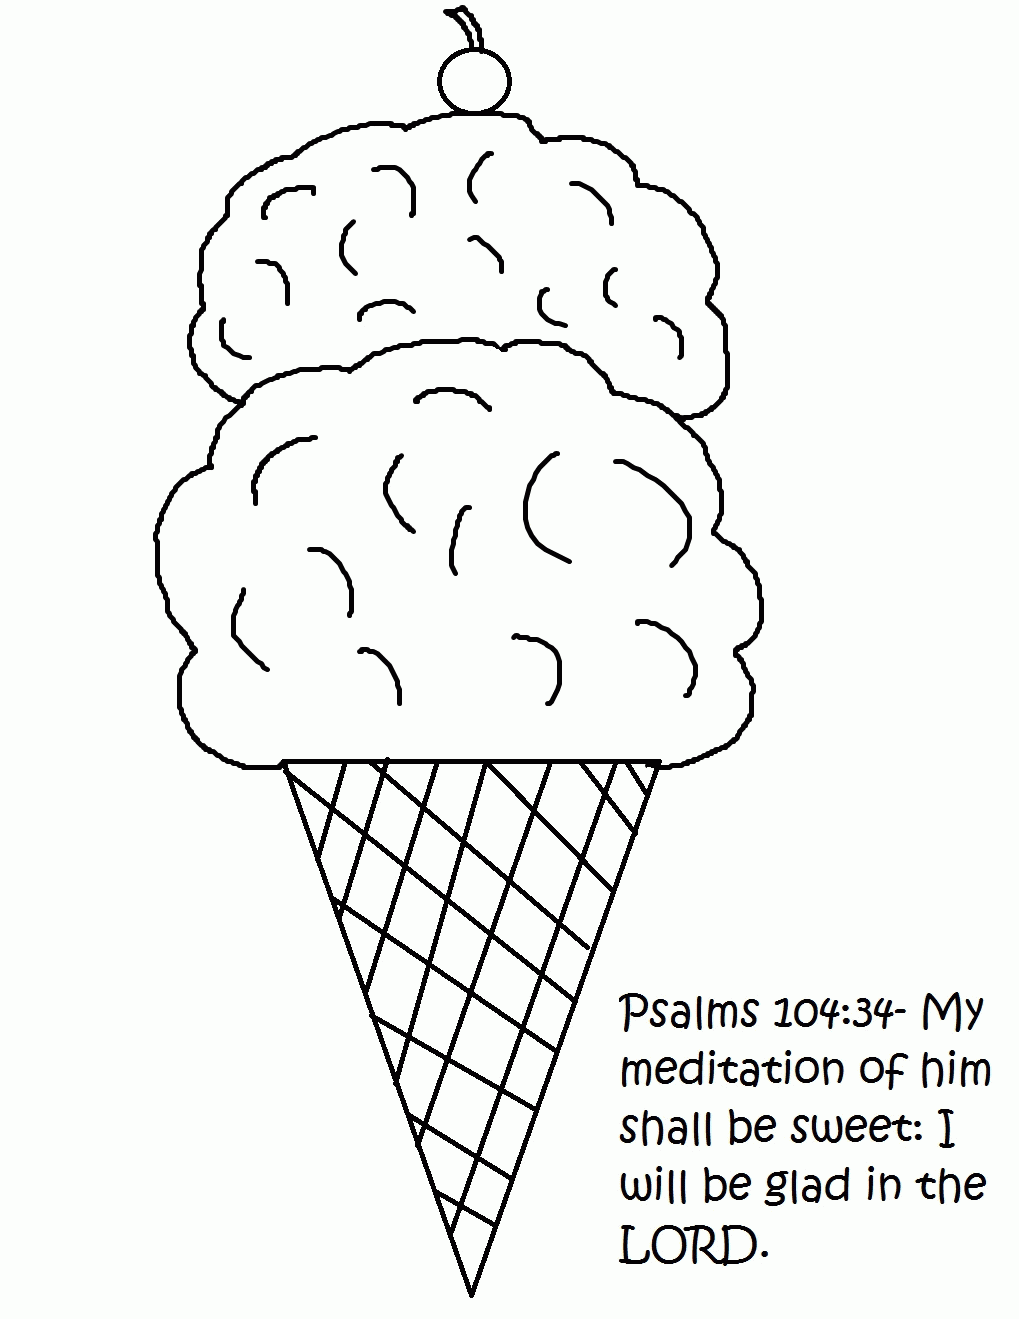 Ice Cream Coloring Pages For Kids   Free Large Images   Coloring Home